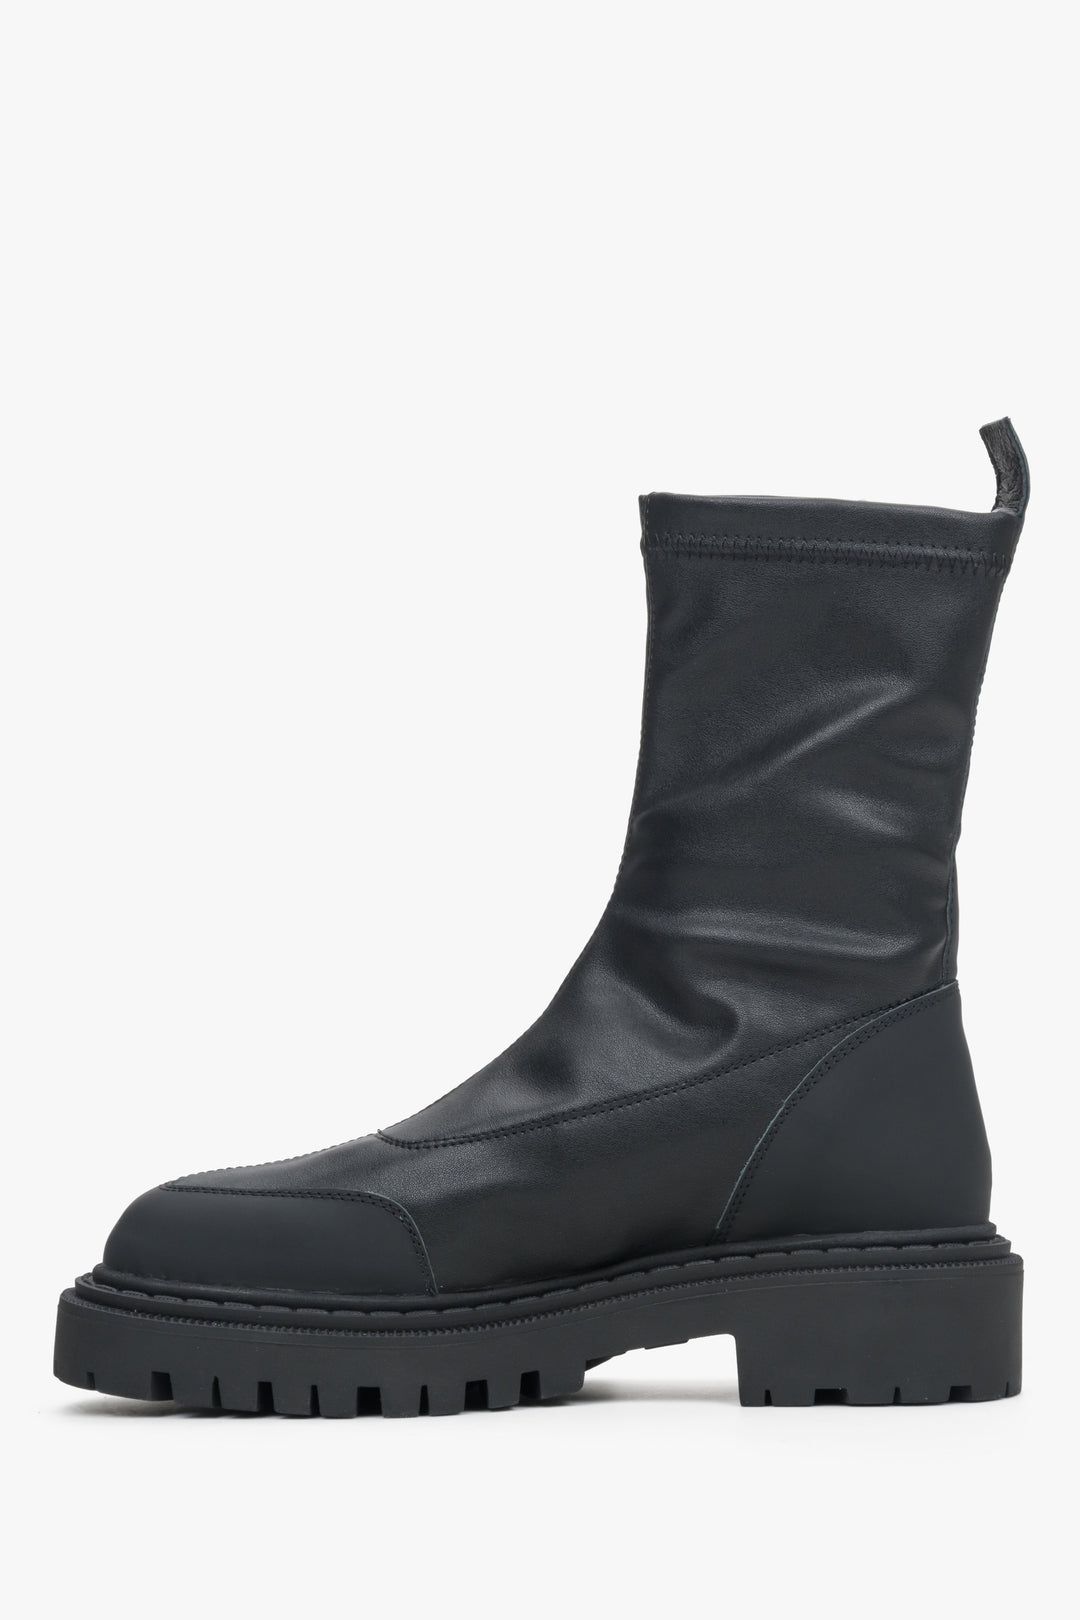 High black women's boots with a flexible upper - shoe profile.